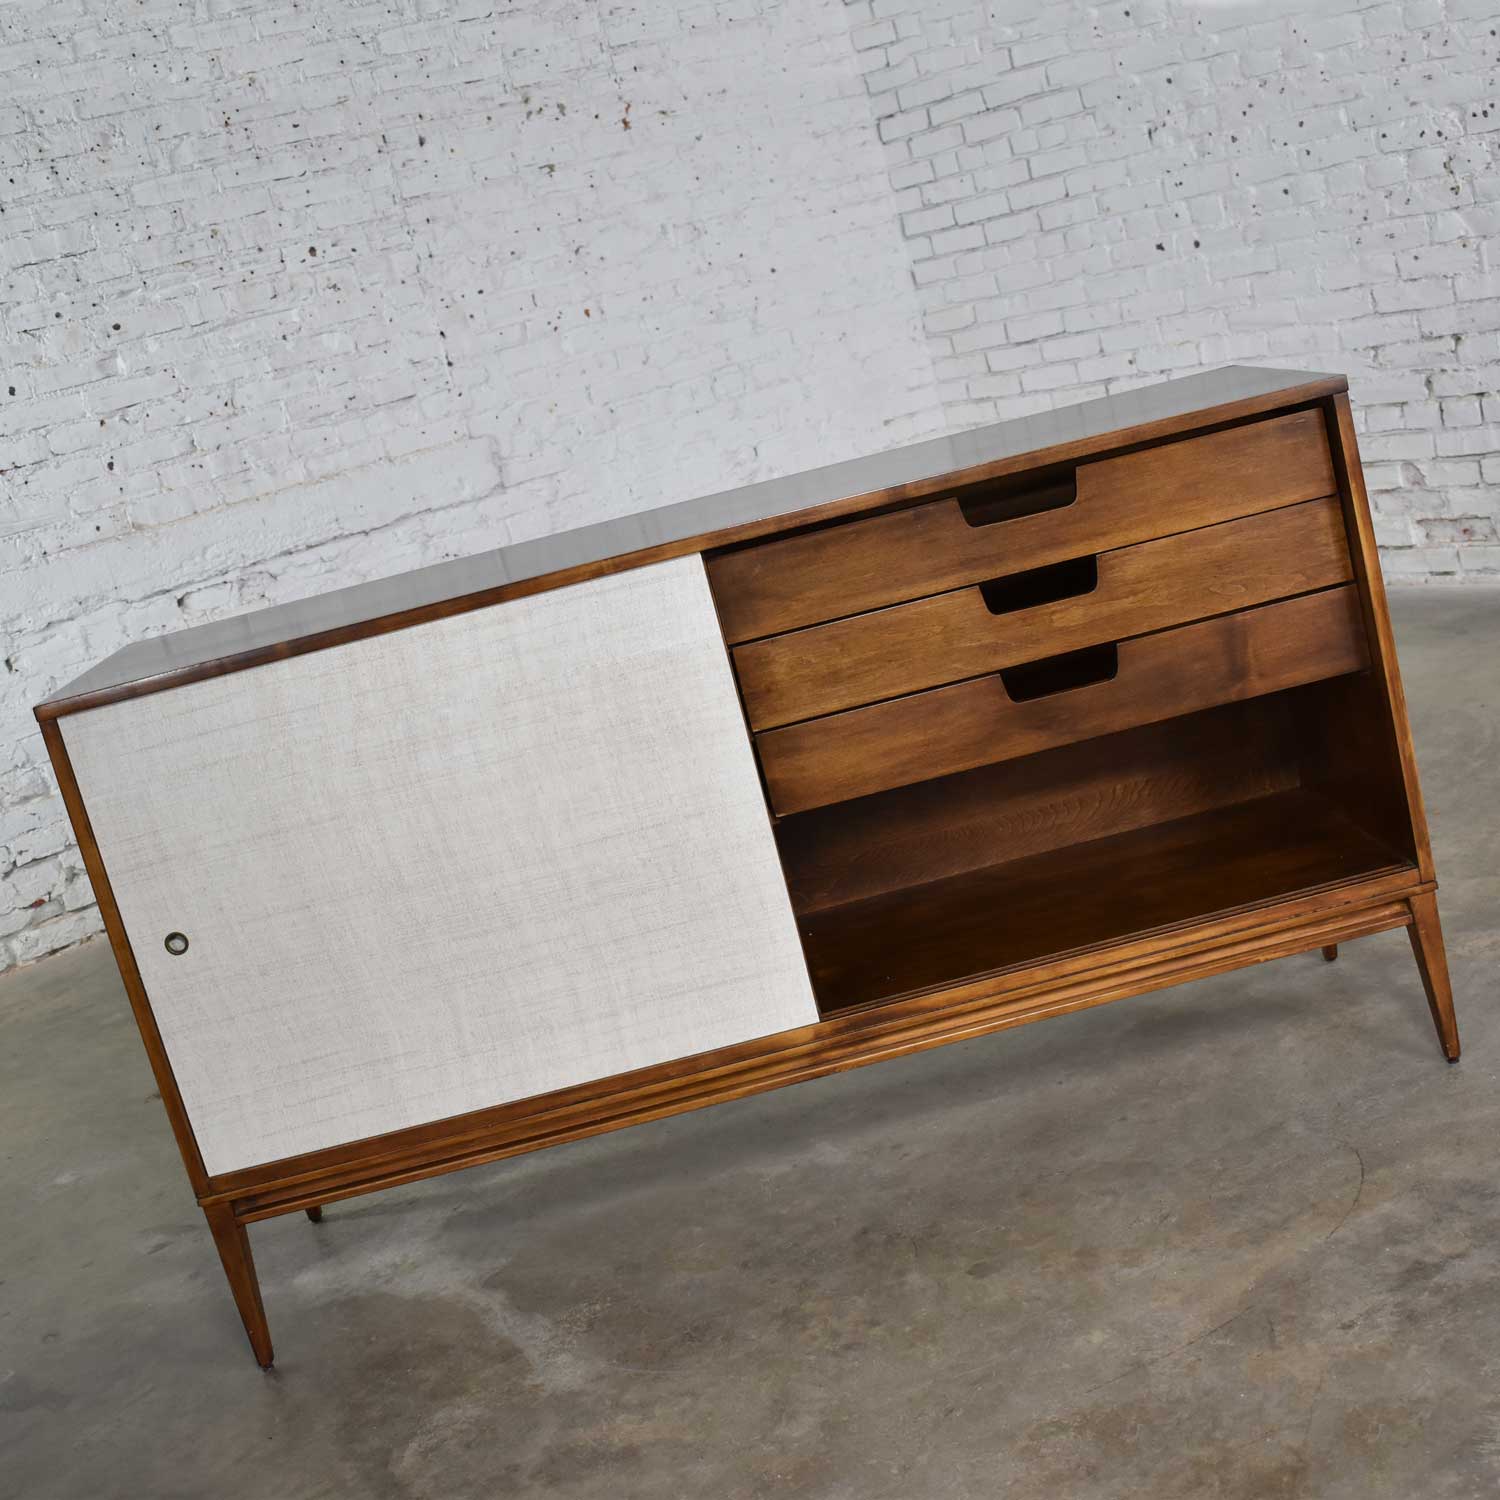 Paul McCobb Mid Century Modern Planner Group Credenza Buffet Cabinet by Winchendon